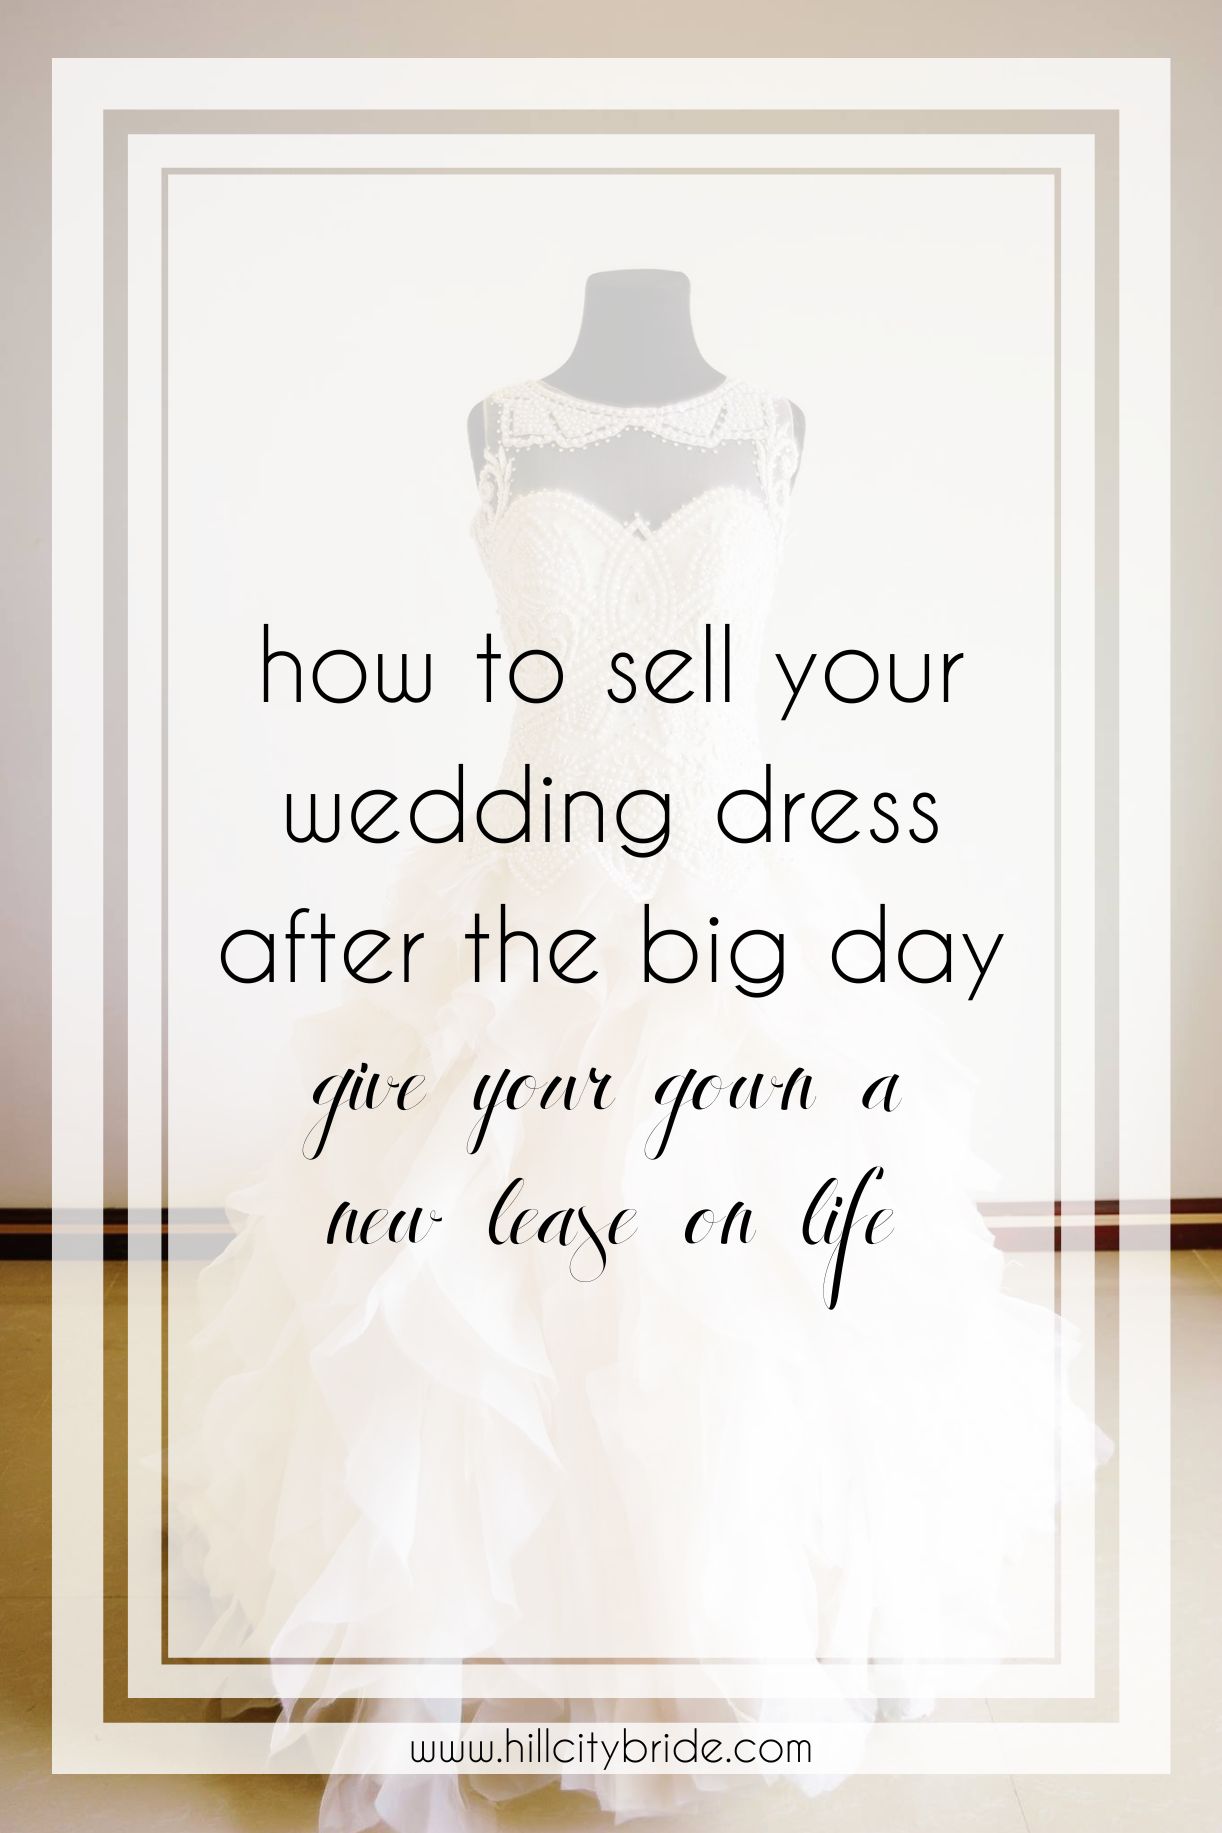 Best Way to Sell Your Wedding Dress After the Big Day